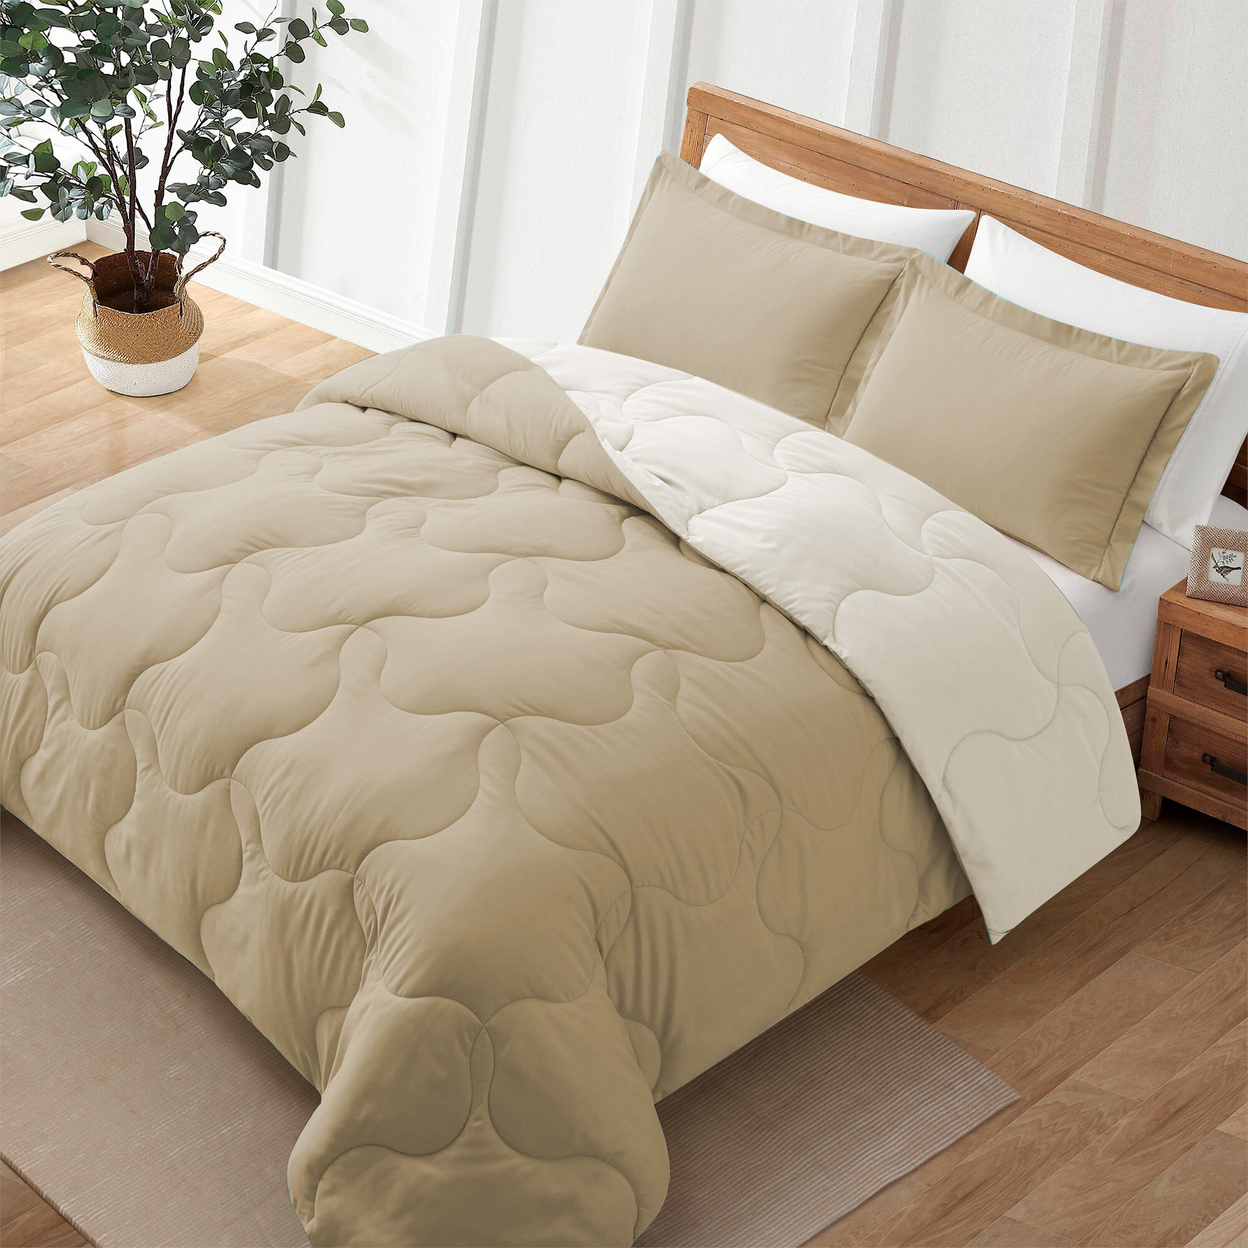 3 Or 2 Pieces Lightweight Reversible Comforter Set With Pillow Shams - Khaki/Ivory, Twin